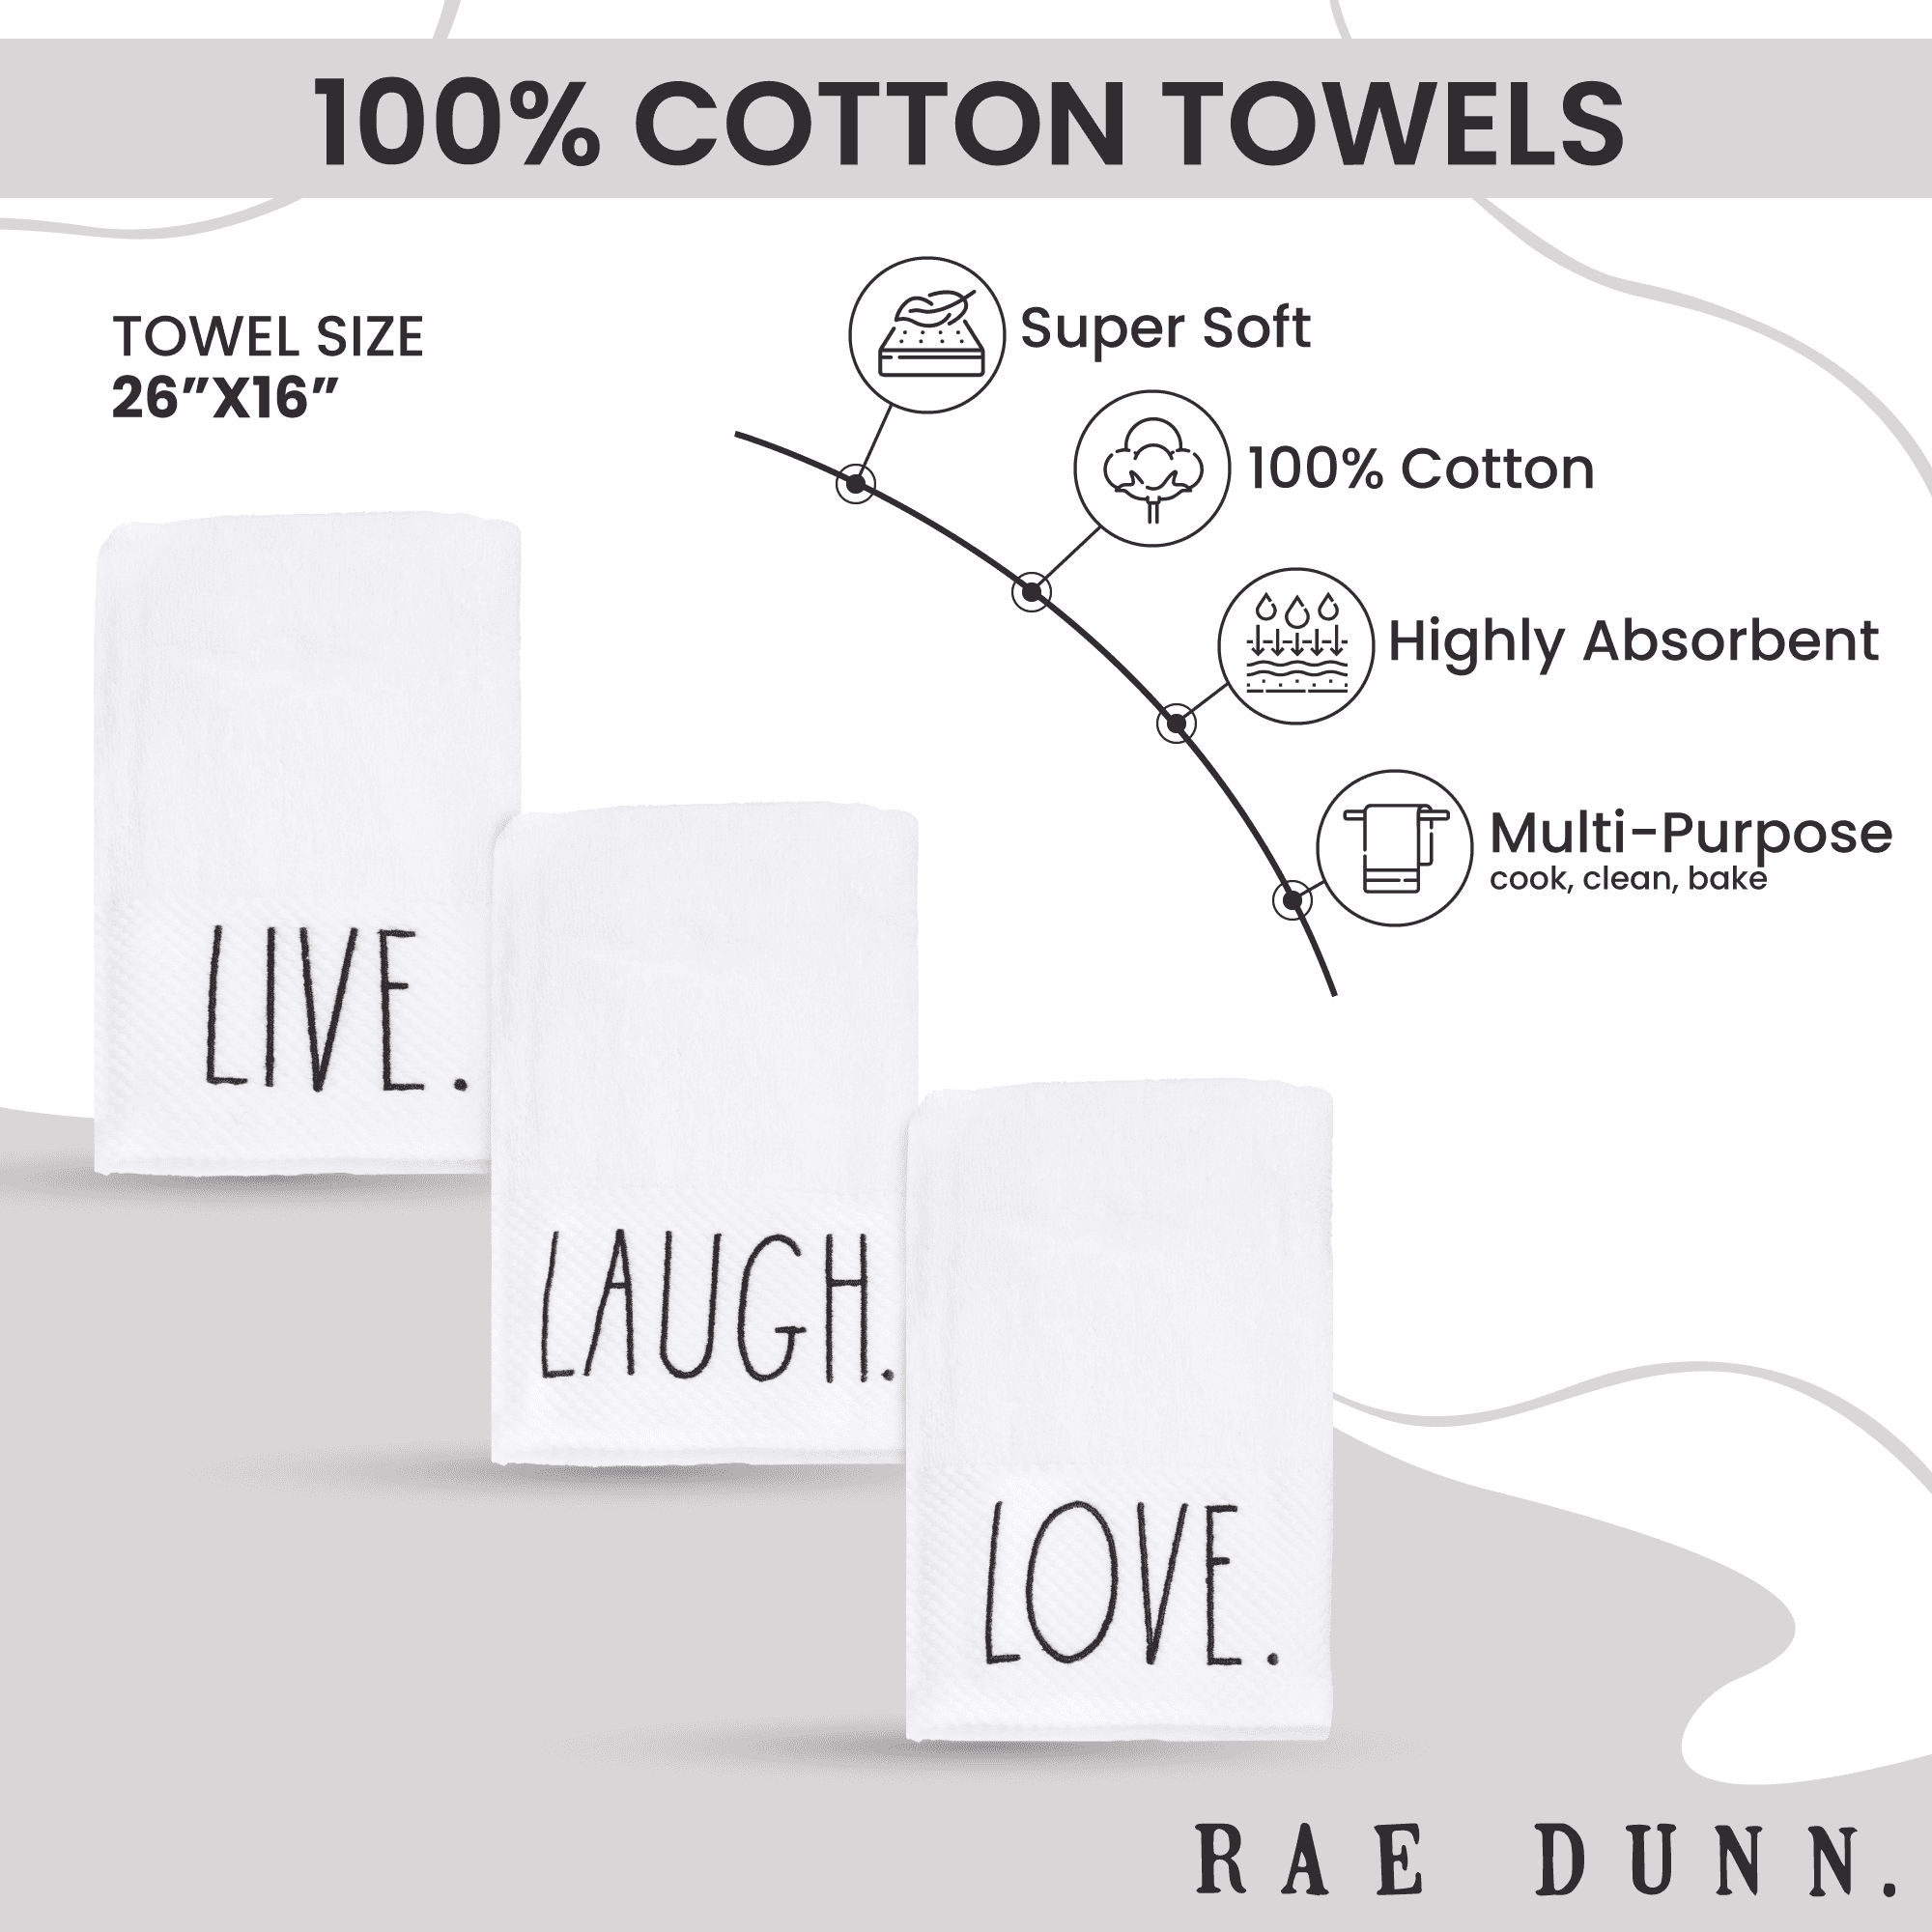 Rae Dunn Hand Towels, Embroidered Decorative Kitchen Towel for Kitchen and  Bathroom, 100% Cotton, Highly Absorbent, 3 Pack, 16x26, Embroidered Happy